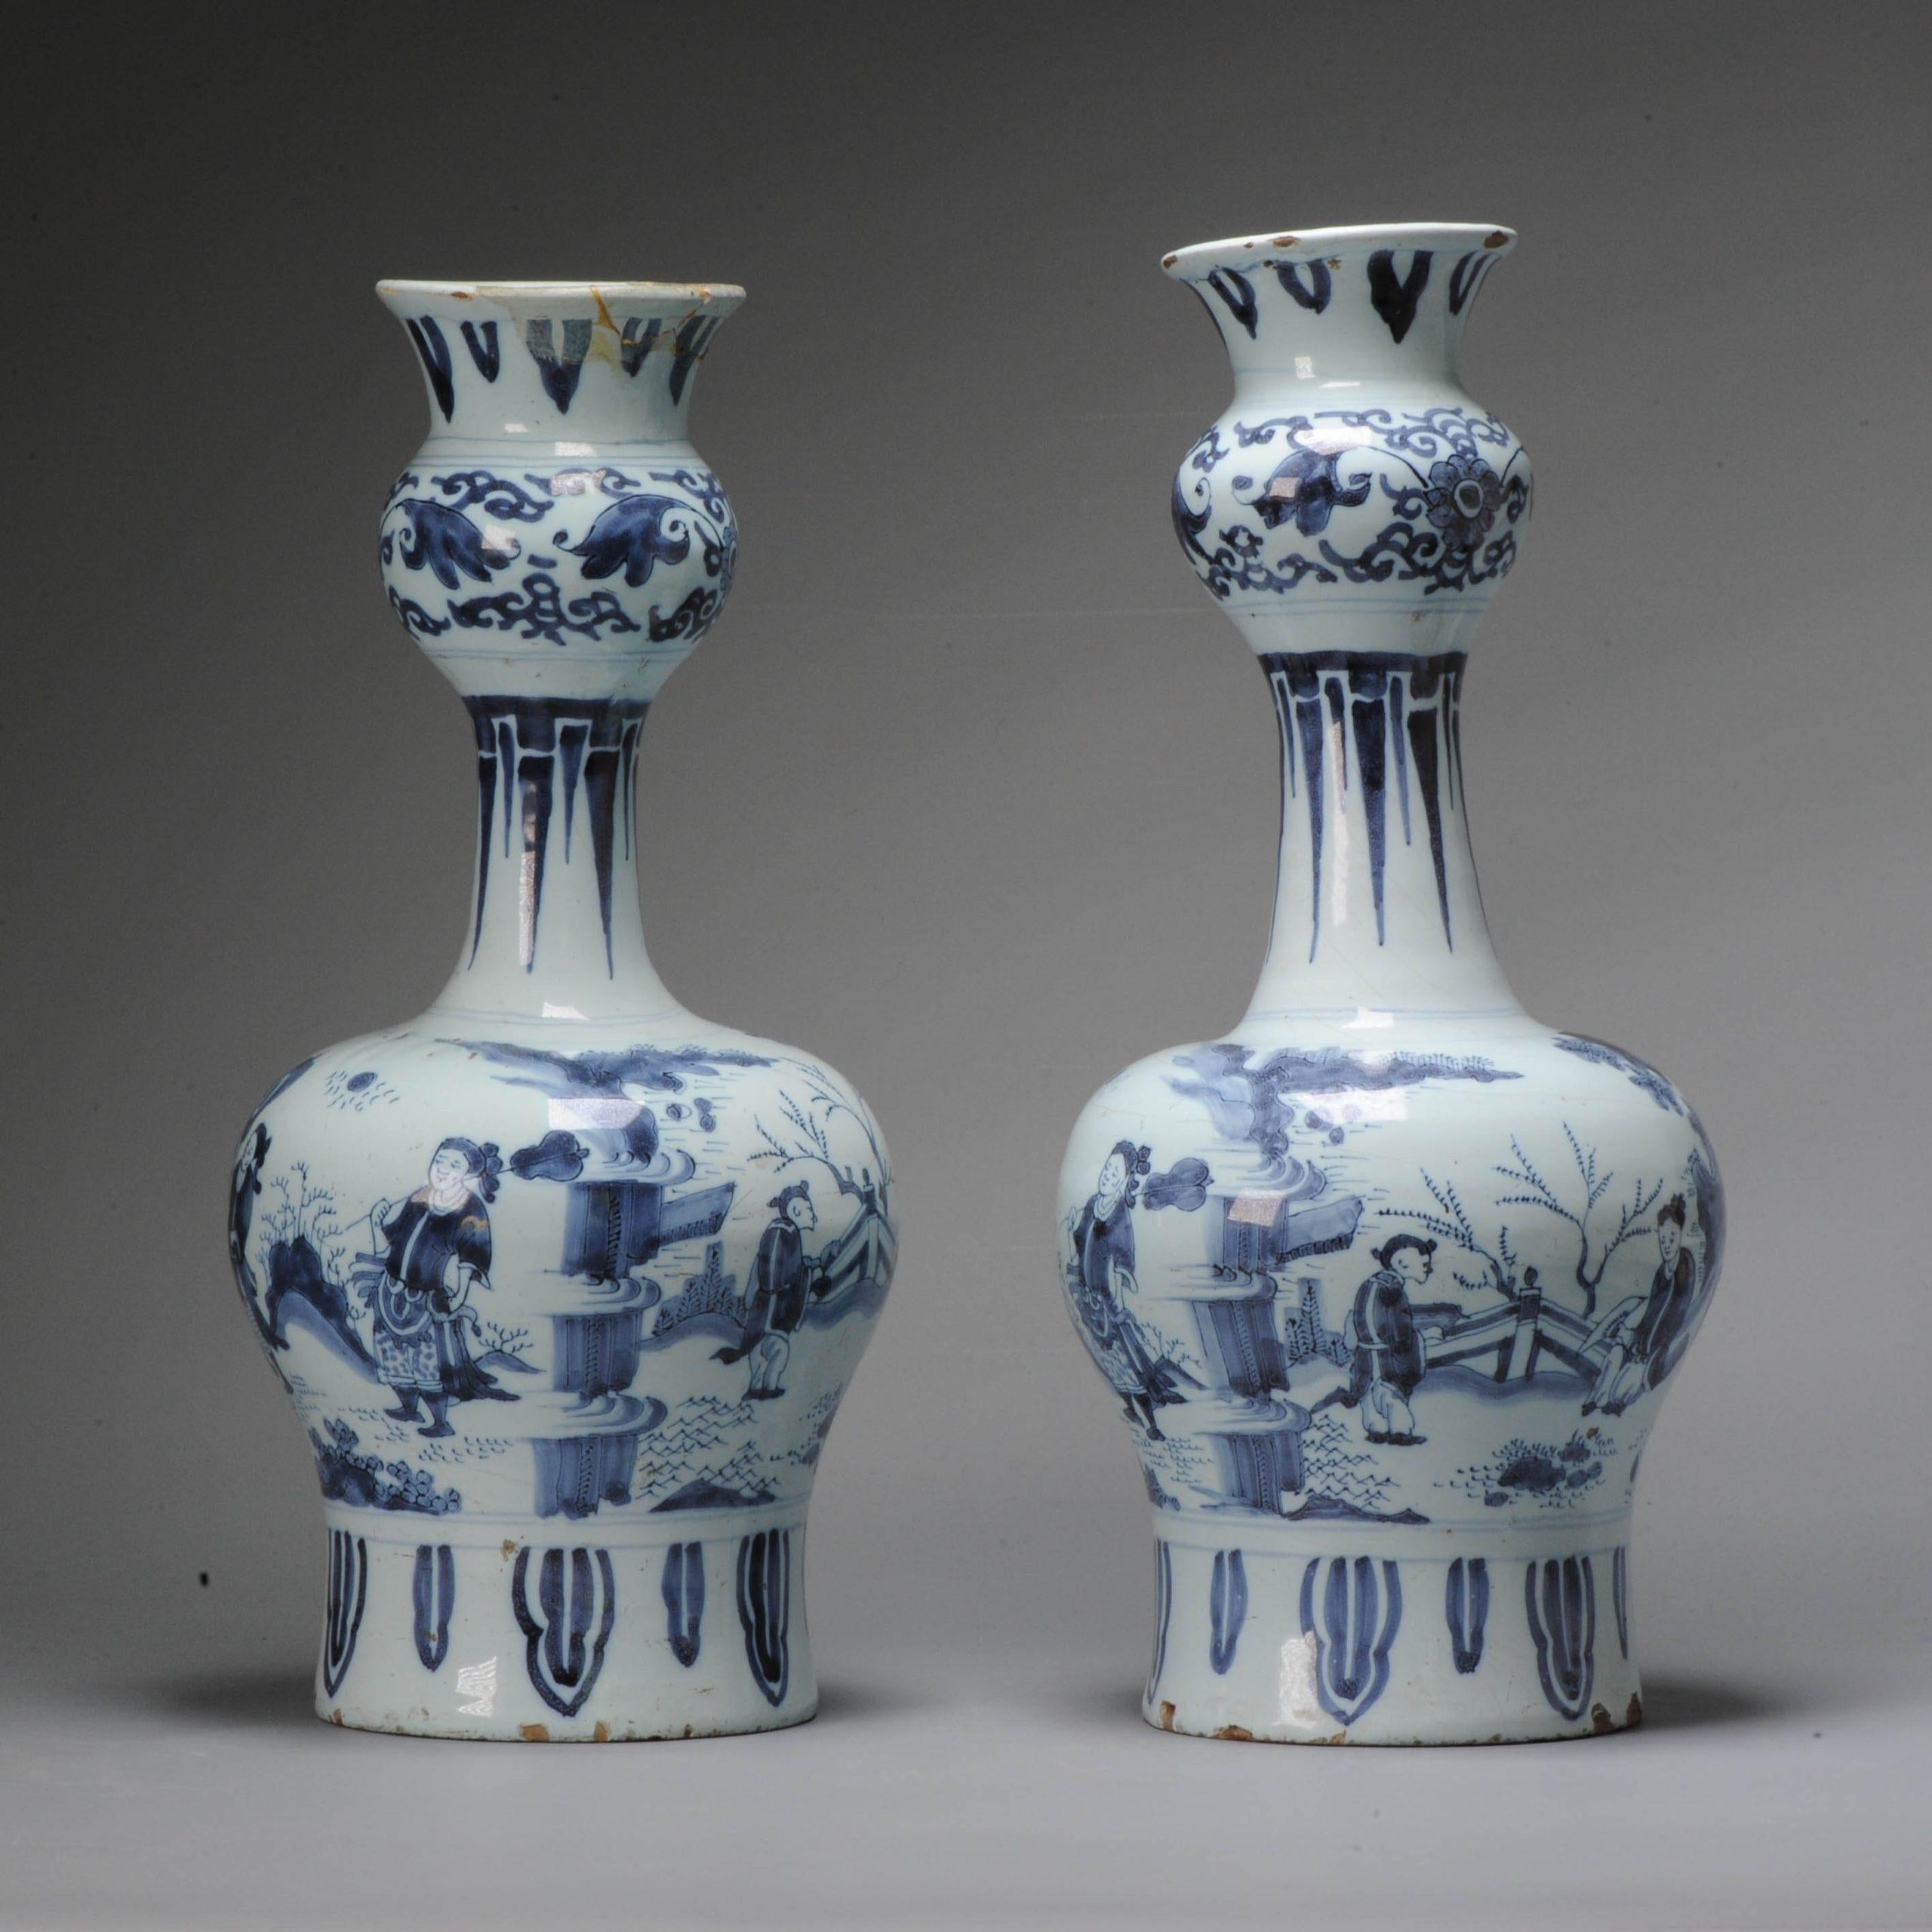 Unusual Dutch Delftware Figural Earthenware Vases in Chinese Transitional Style In Good Condition For Sale In Amsterdam, Noord Holland